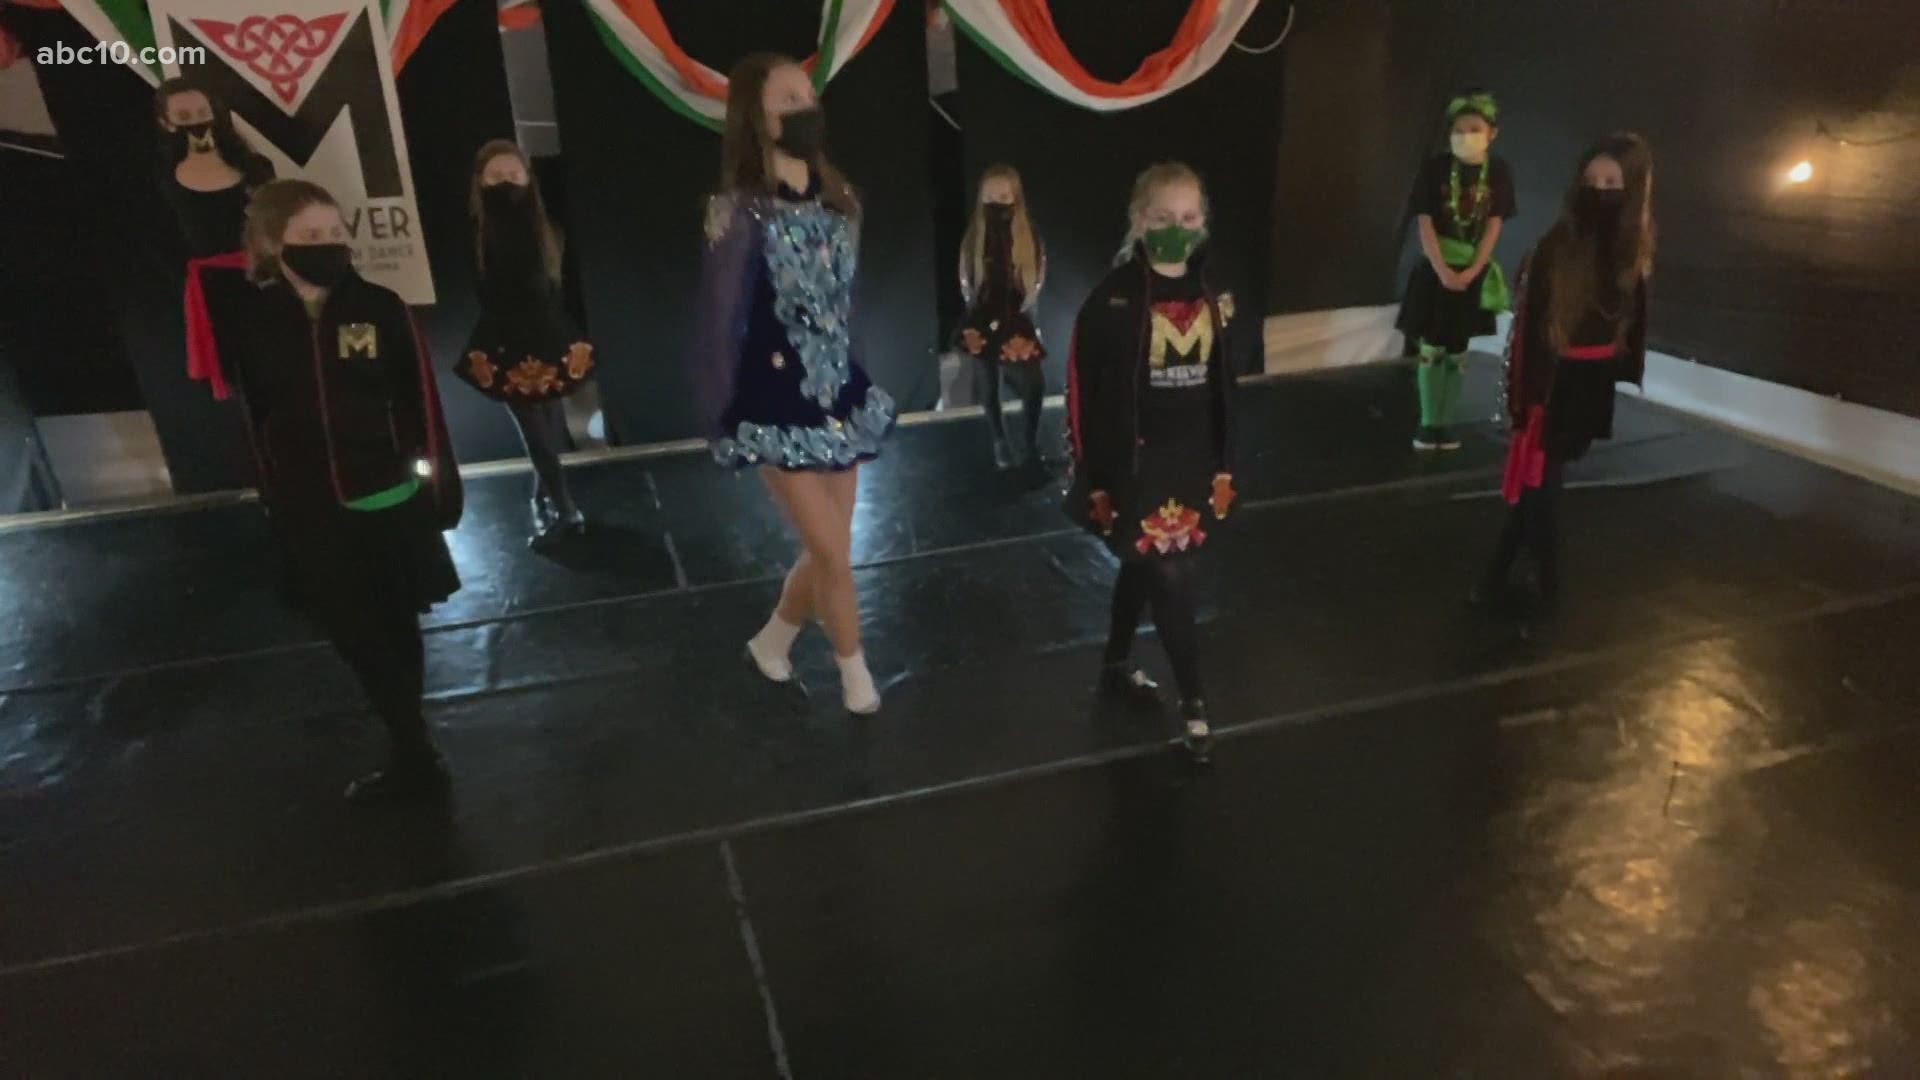 Check out the McKeever School of Irish Dance website to learn more about classes in Sacramento.